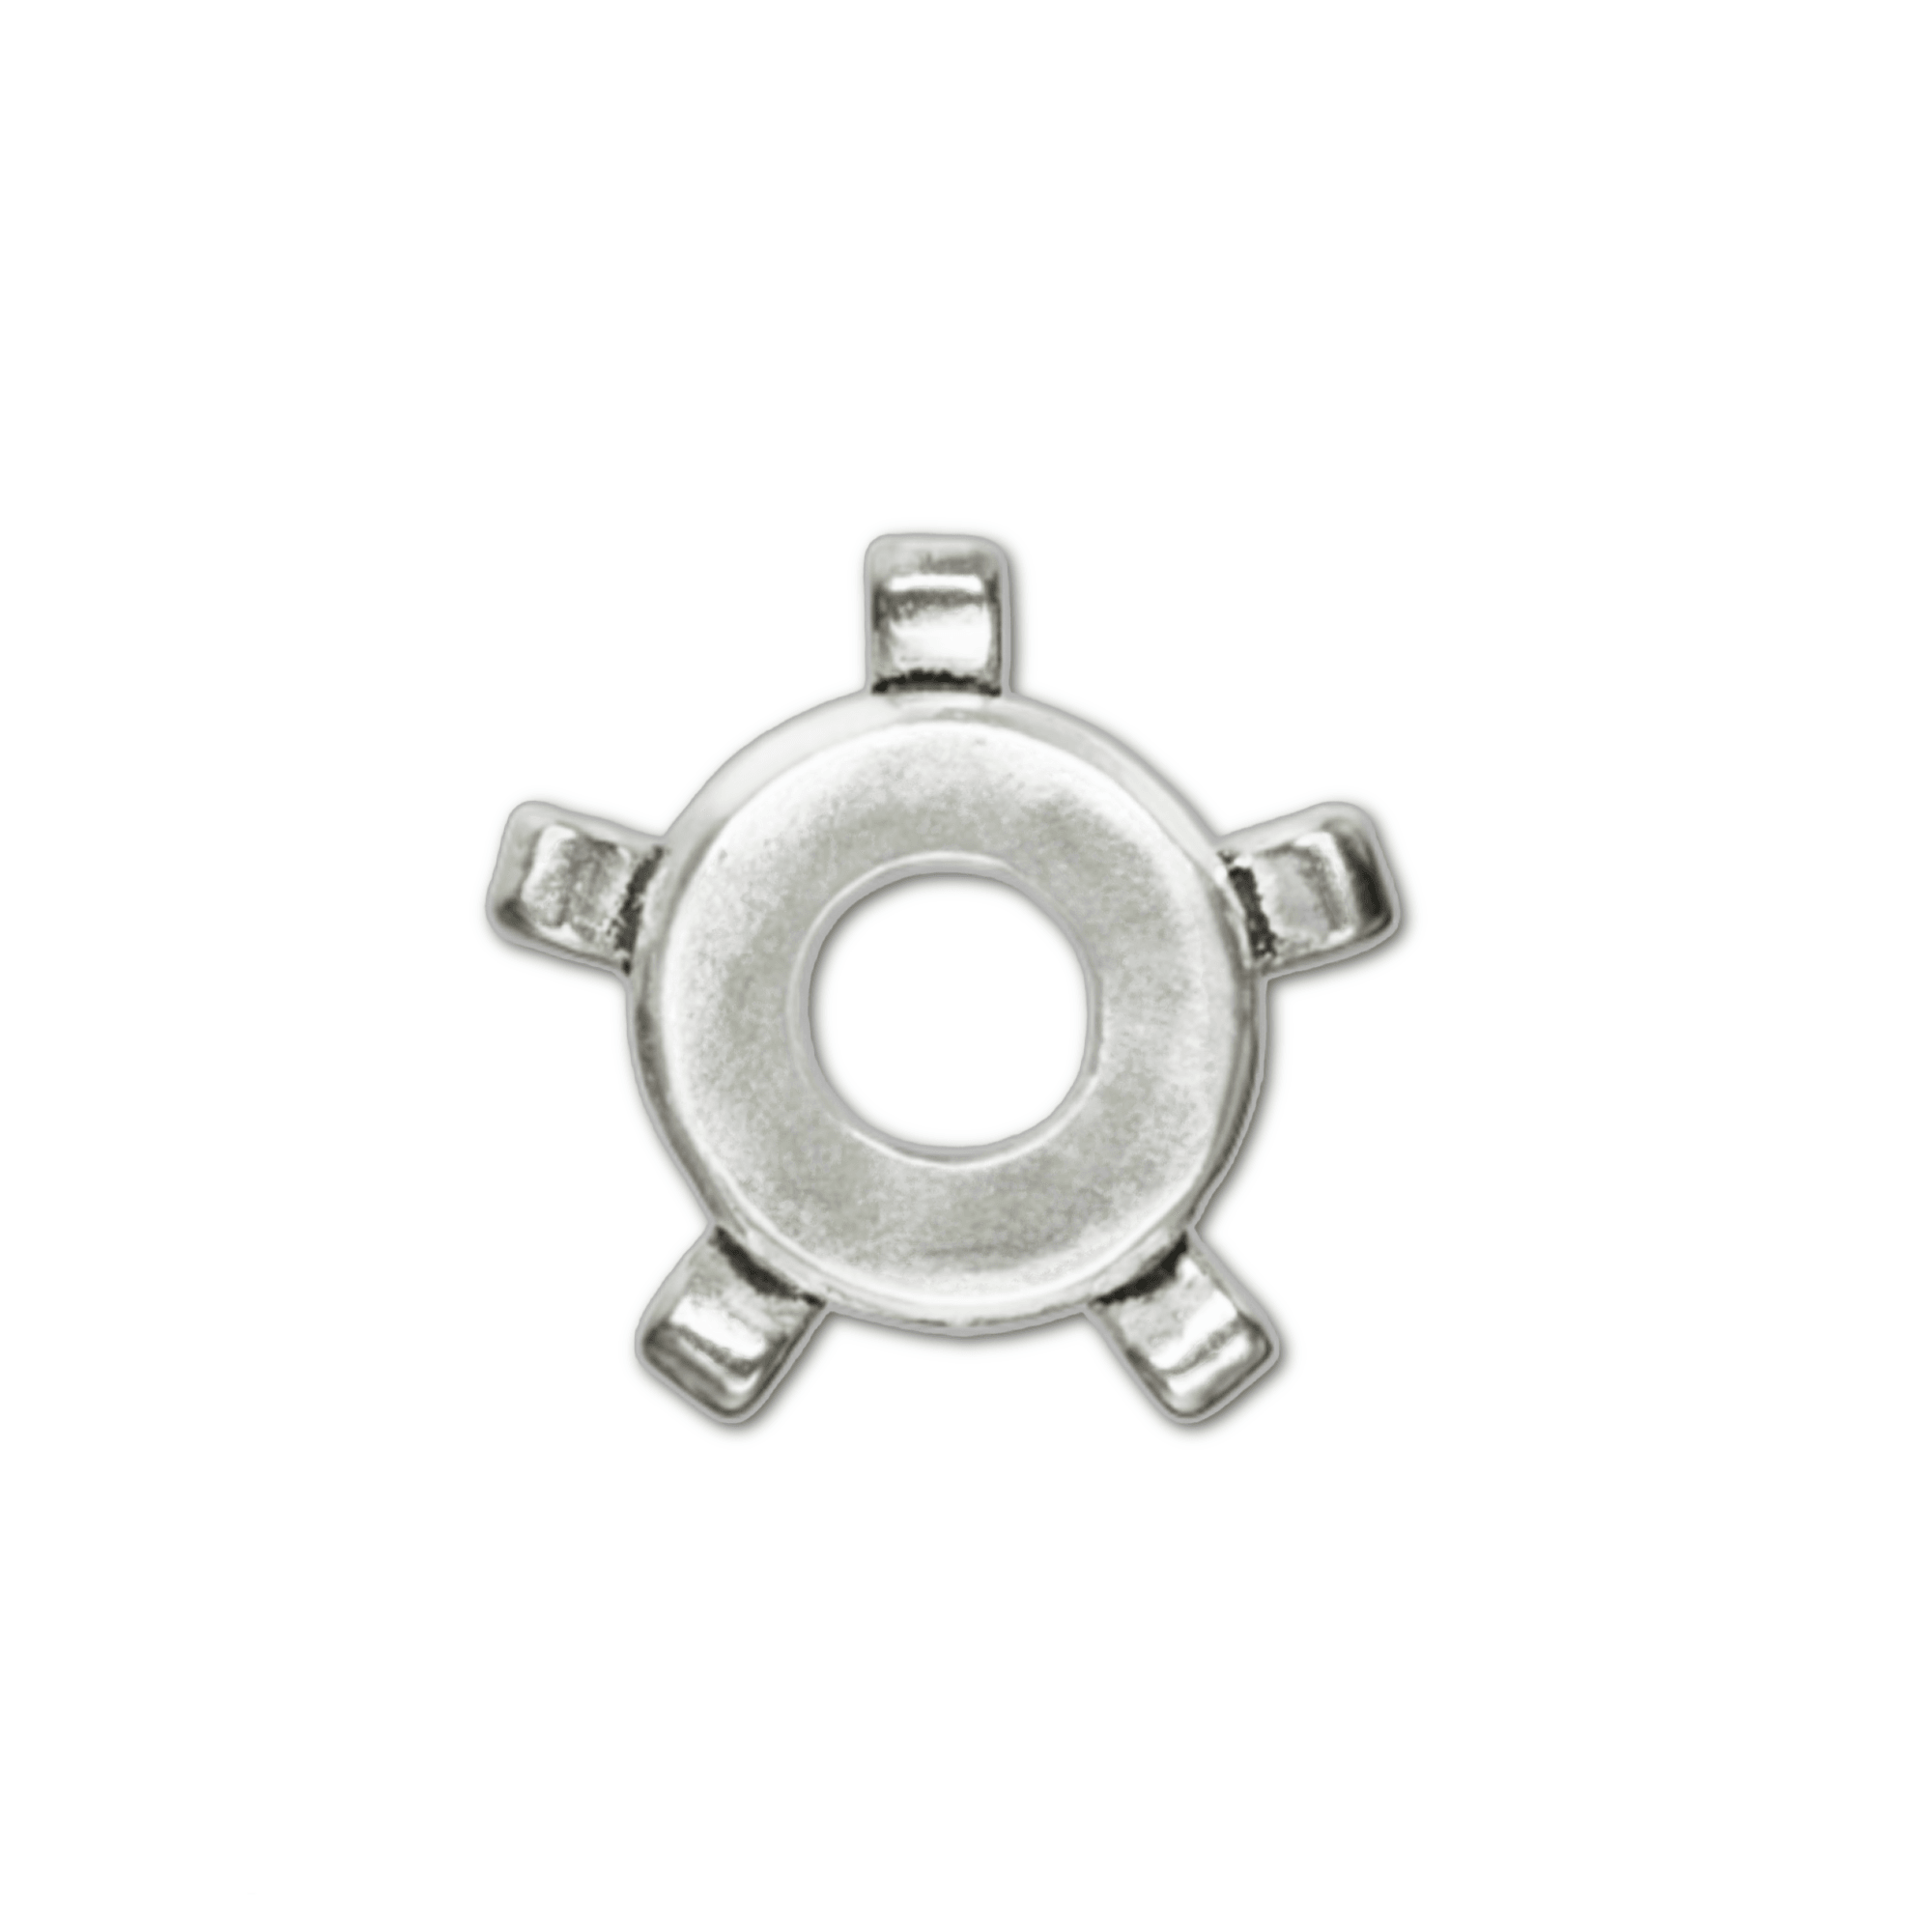 Military Jewelry, Military Charms, Military Gifts,  Gear Spacer